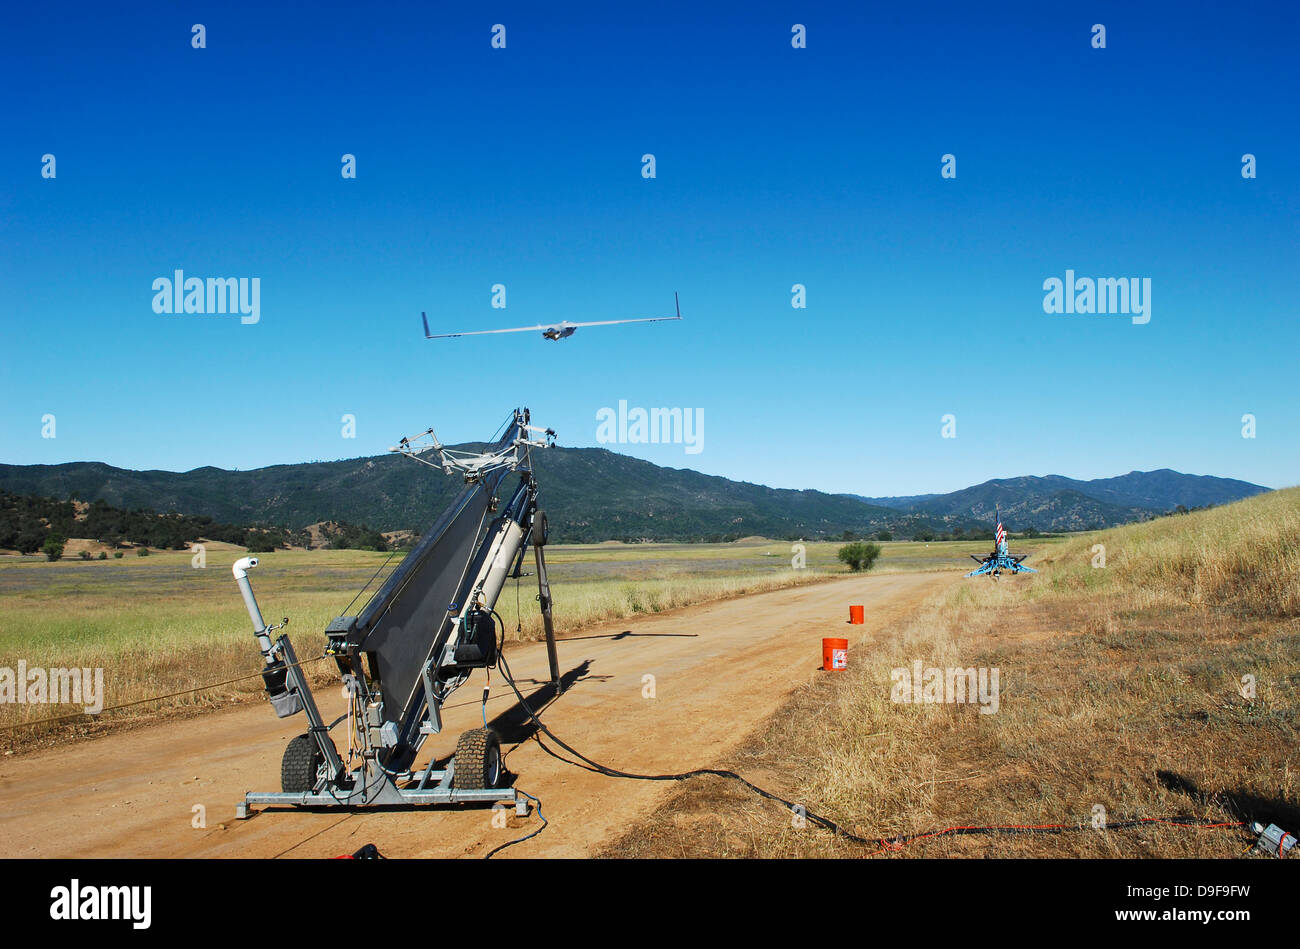 A ScanEagle unmanned aerial vehicle is launched from its catapult. Stock Photo